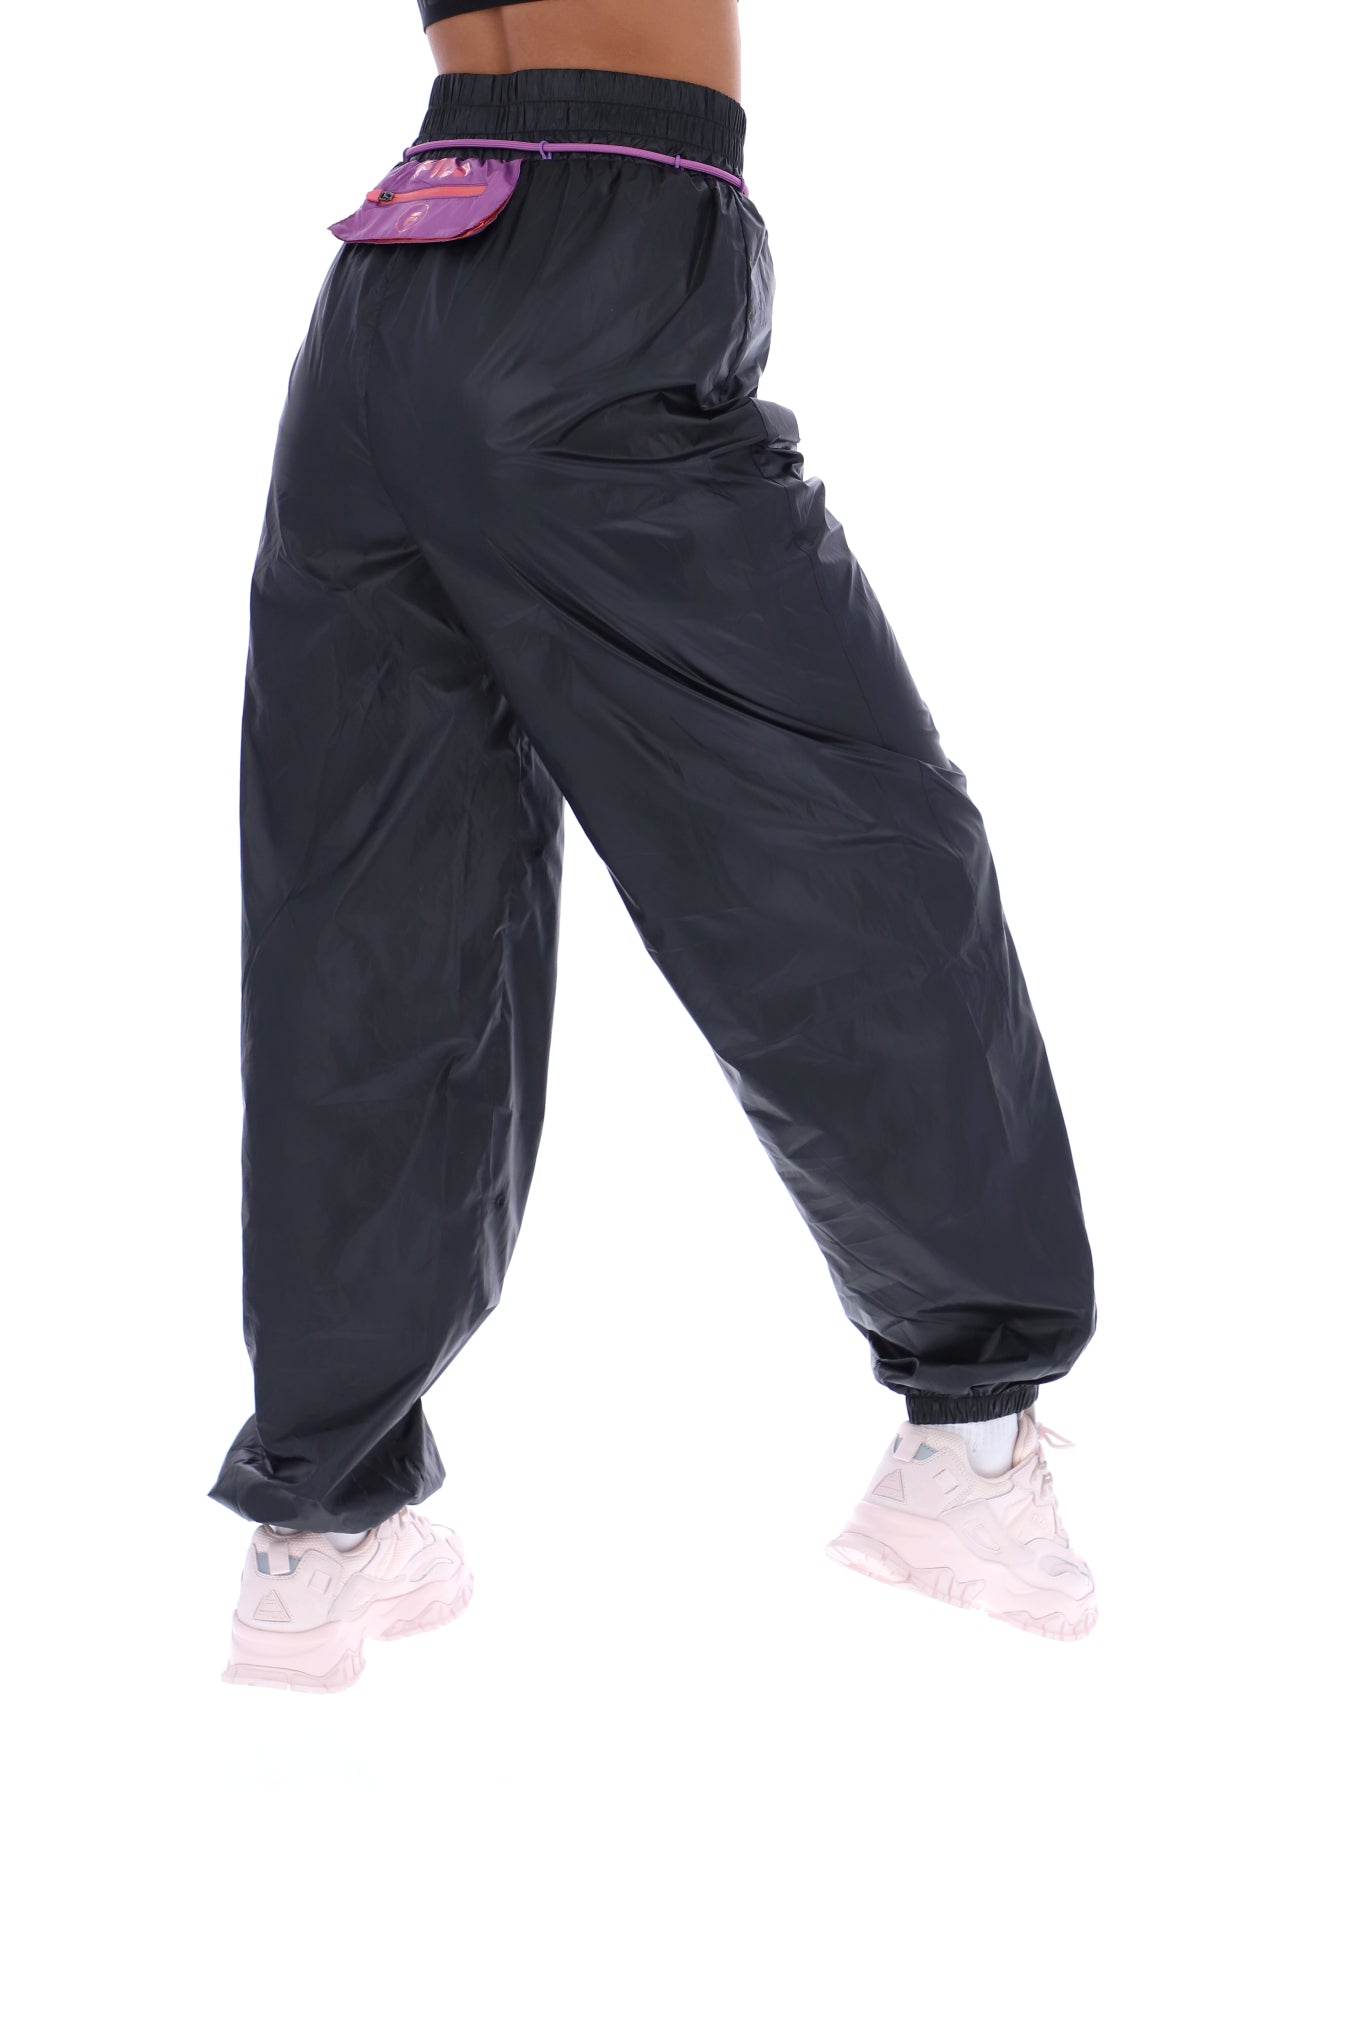 Male Solid Imported Ns Lycra parachute Lower/Trackpants -DnNsL/12/22/6,  Black